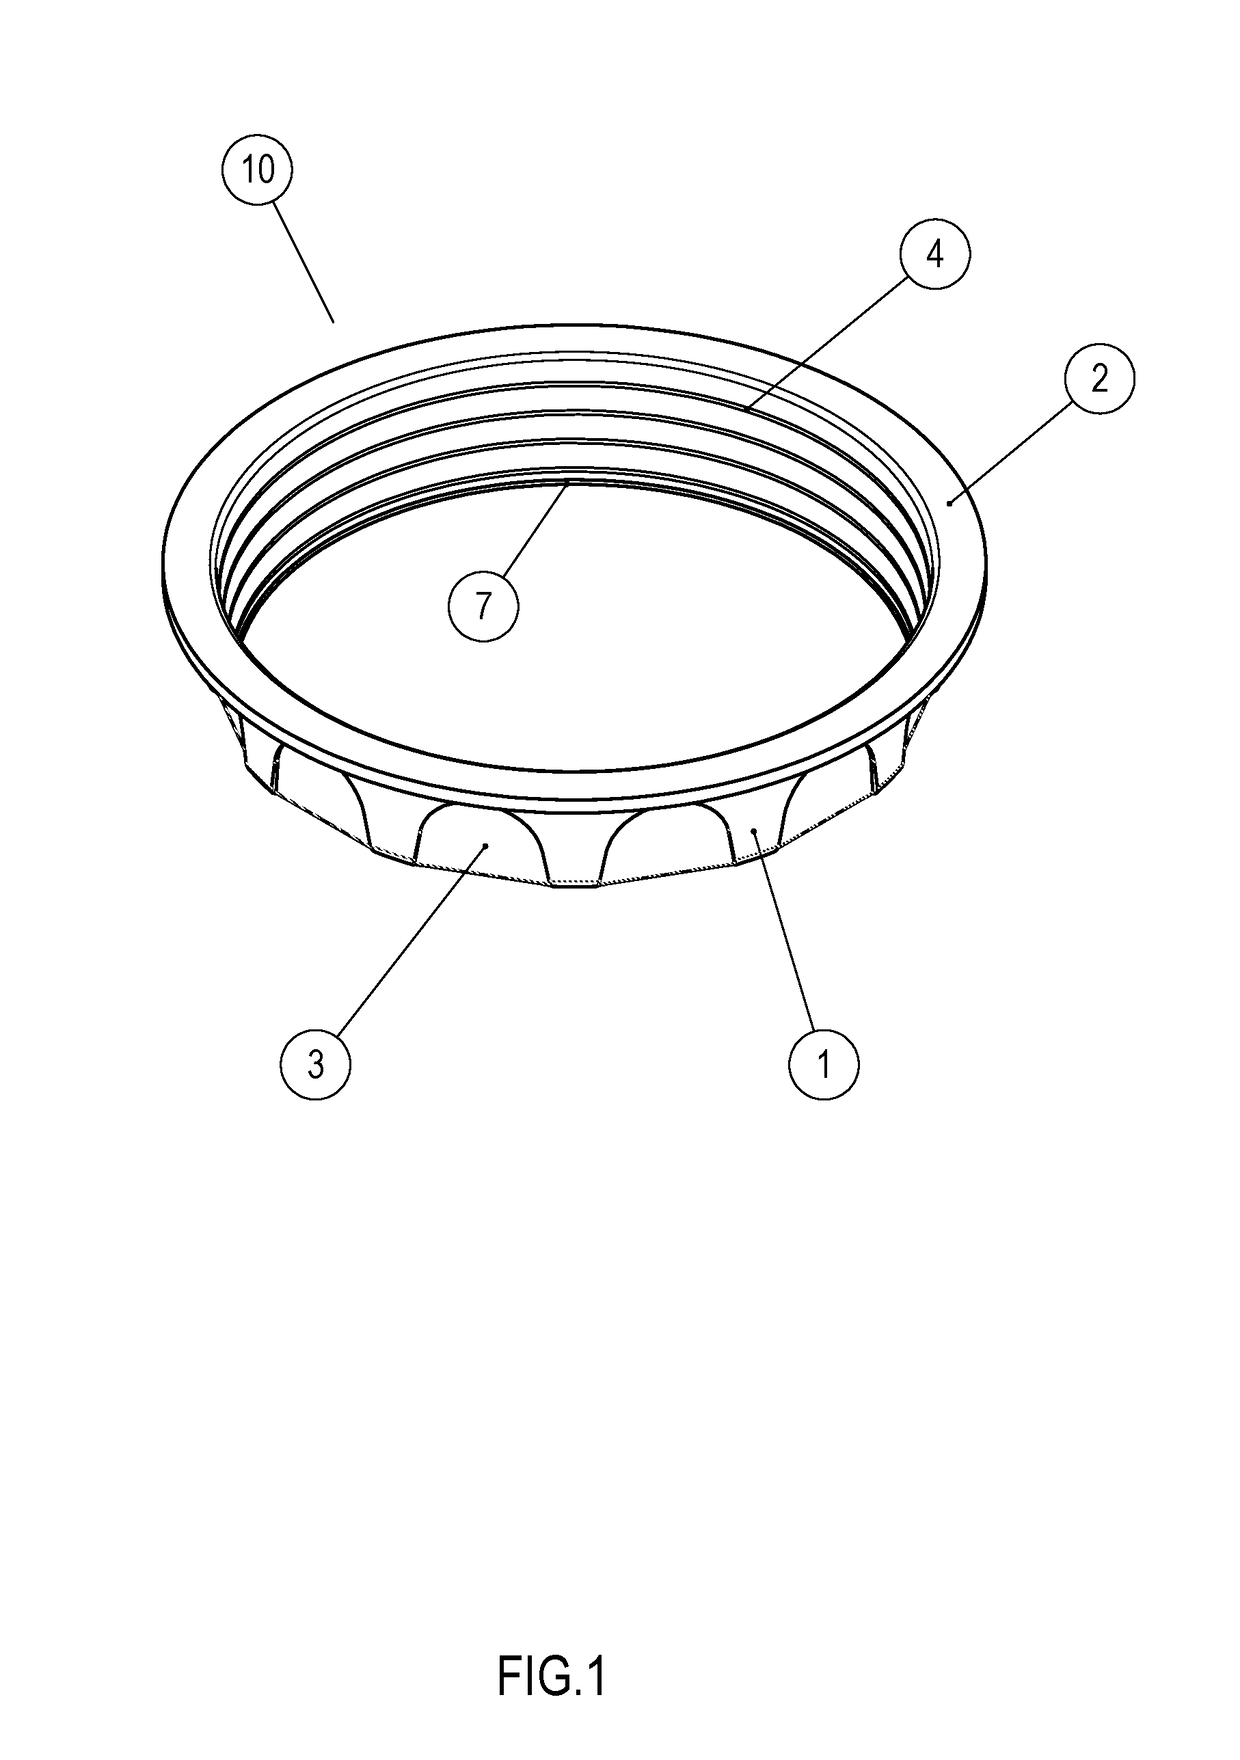 Reinforcement ring for capsules for obtaining beverages